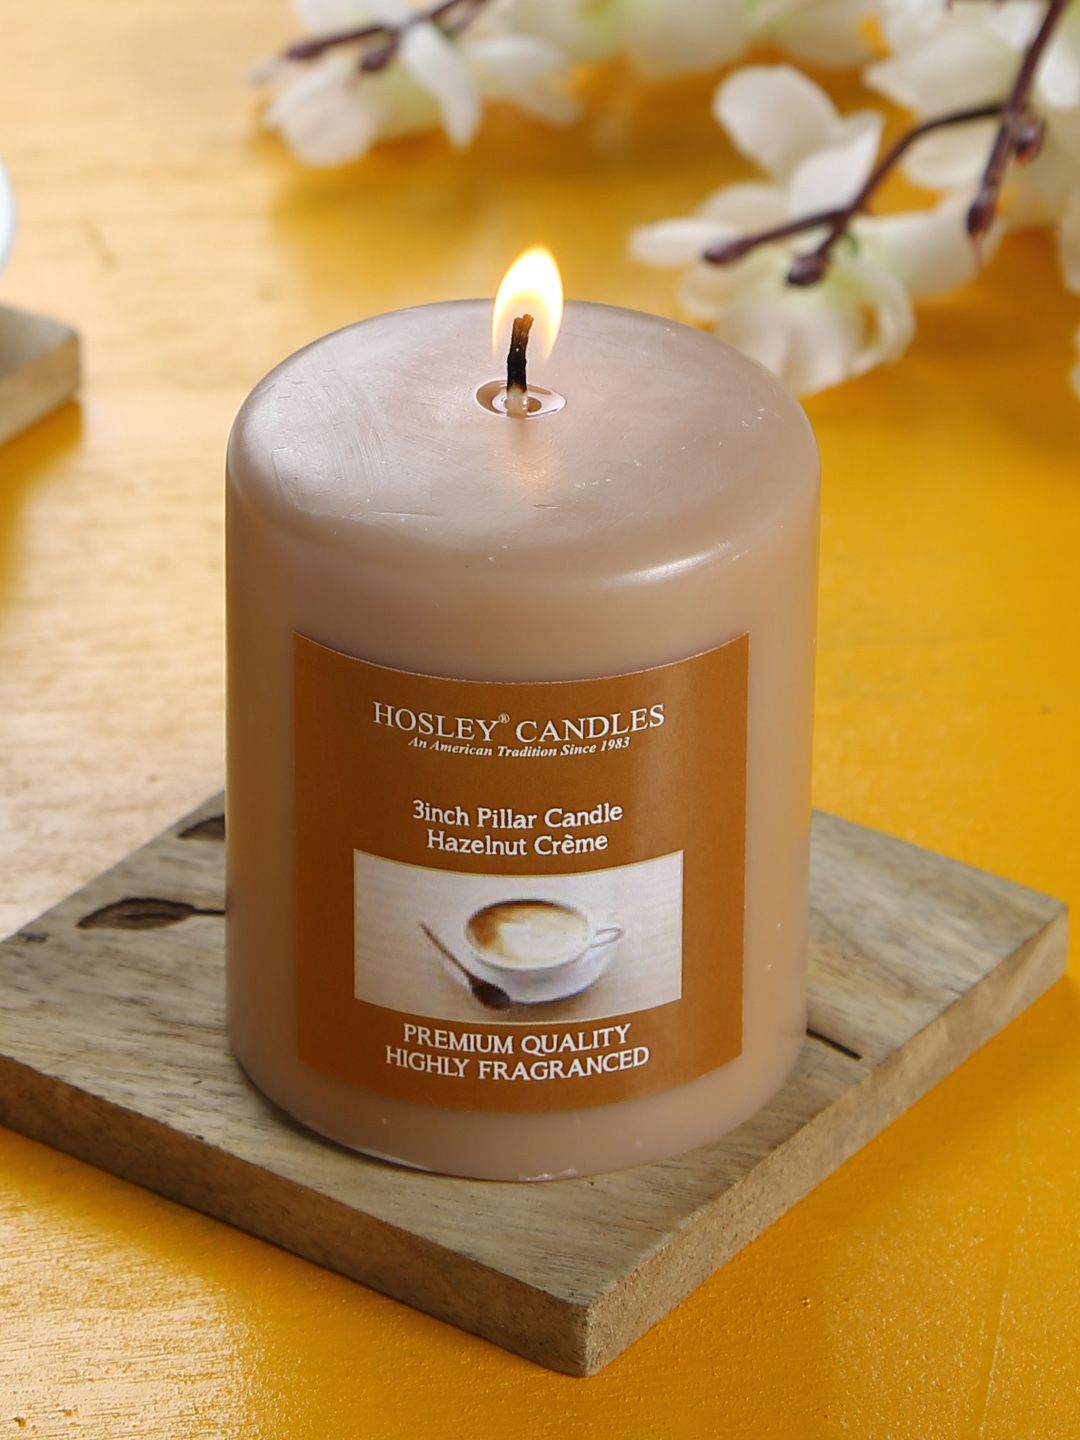 HOSLEY Brown Hazelnut Creme Highly Fragranced 3inch Pillar Candle Price in India